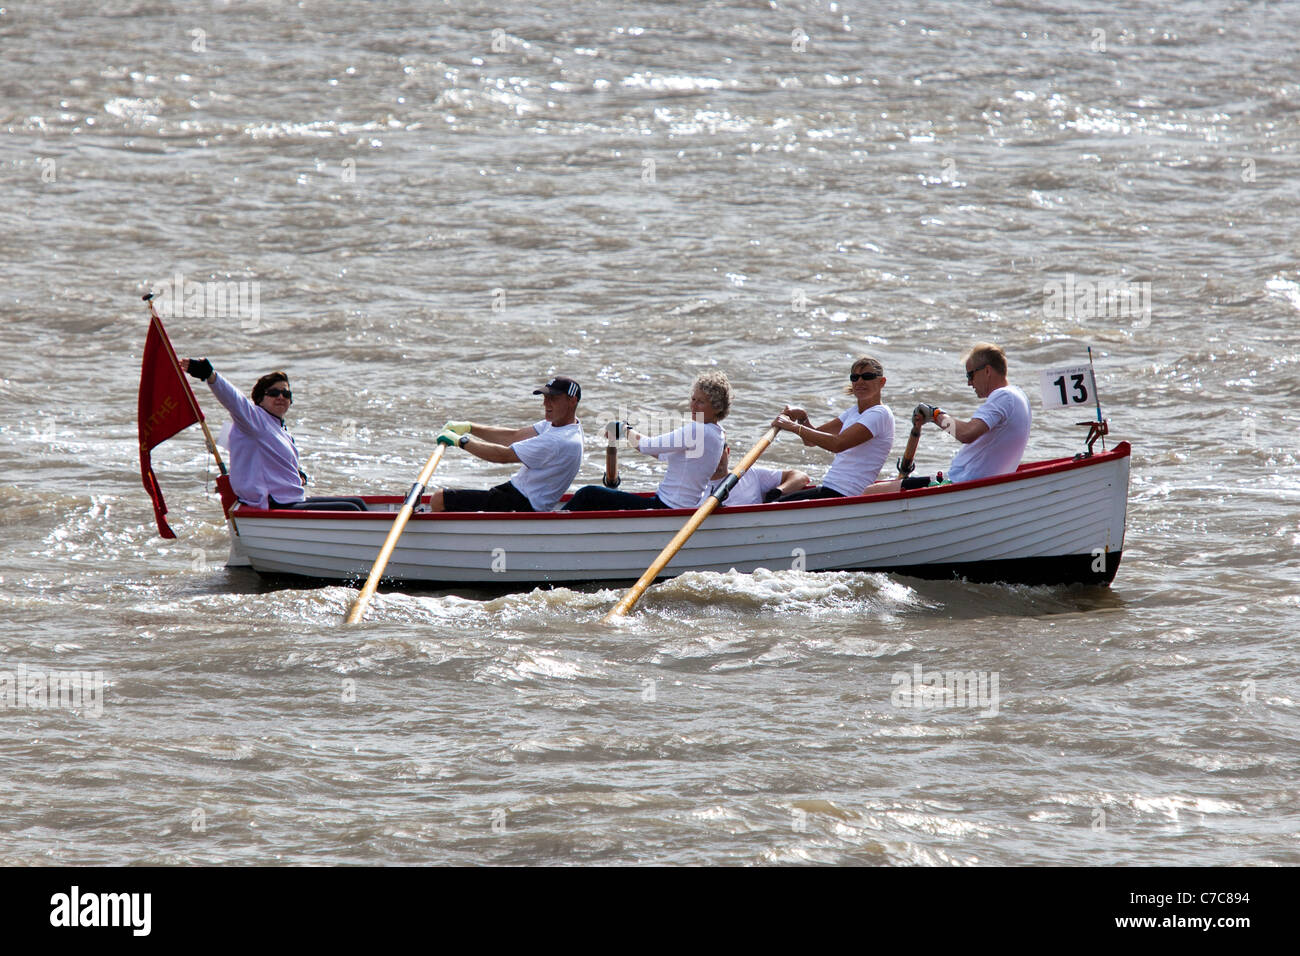 The Great River Race, The Thames, London, UK. September 2011. Stock Photo